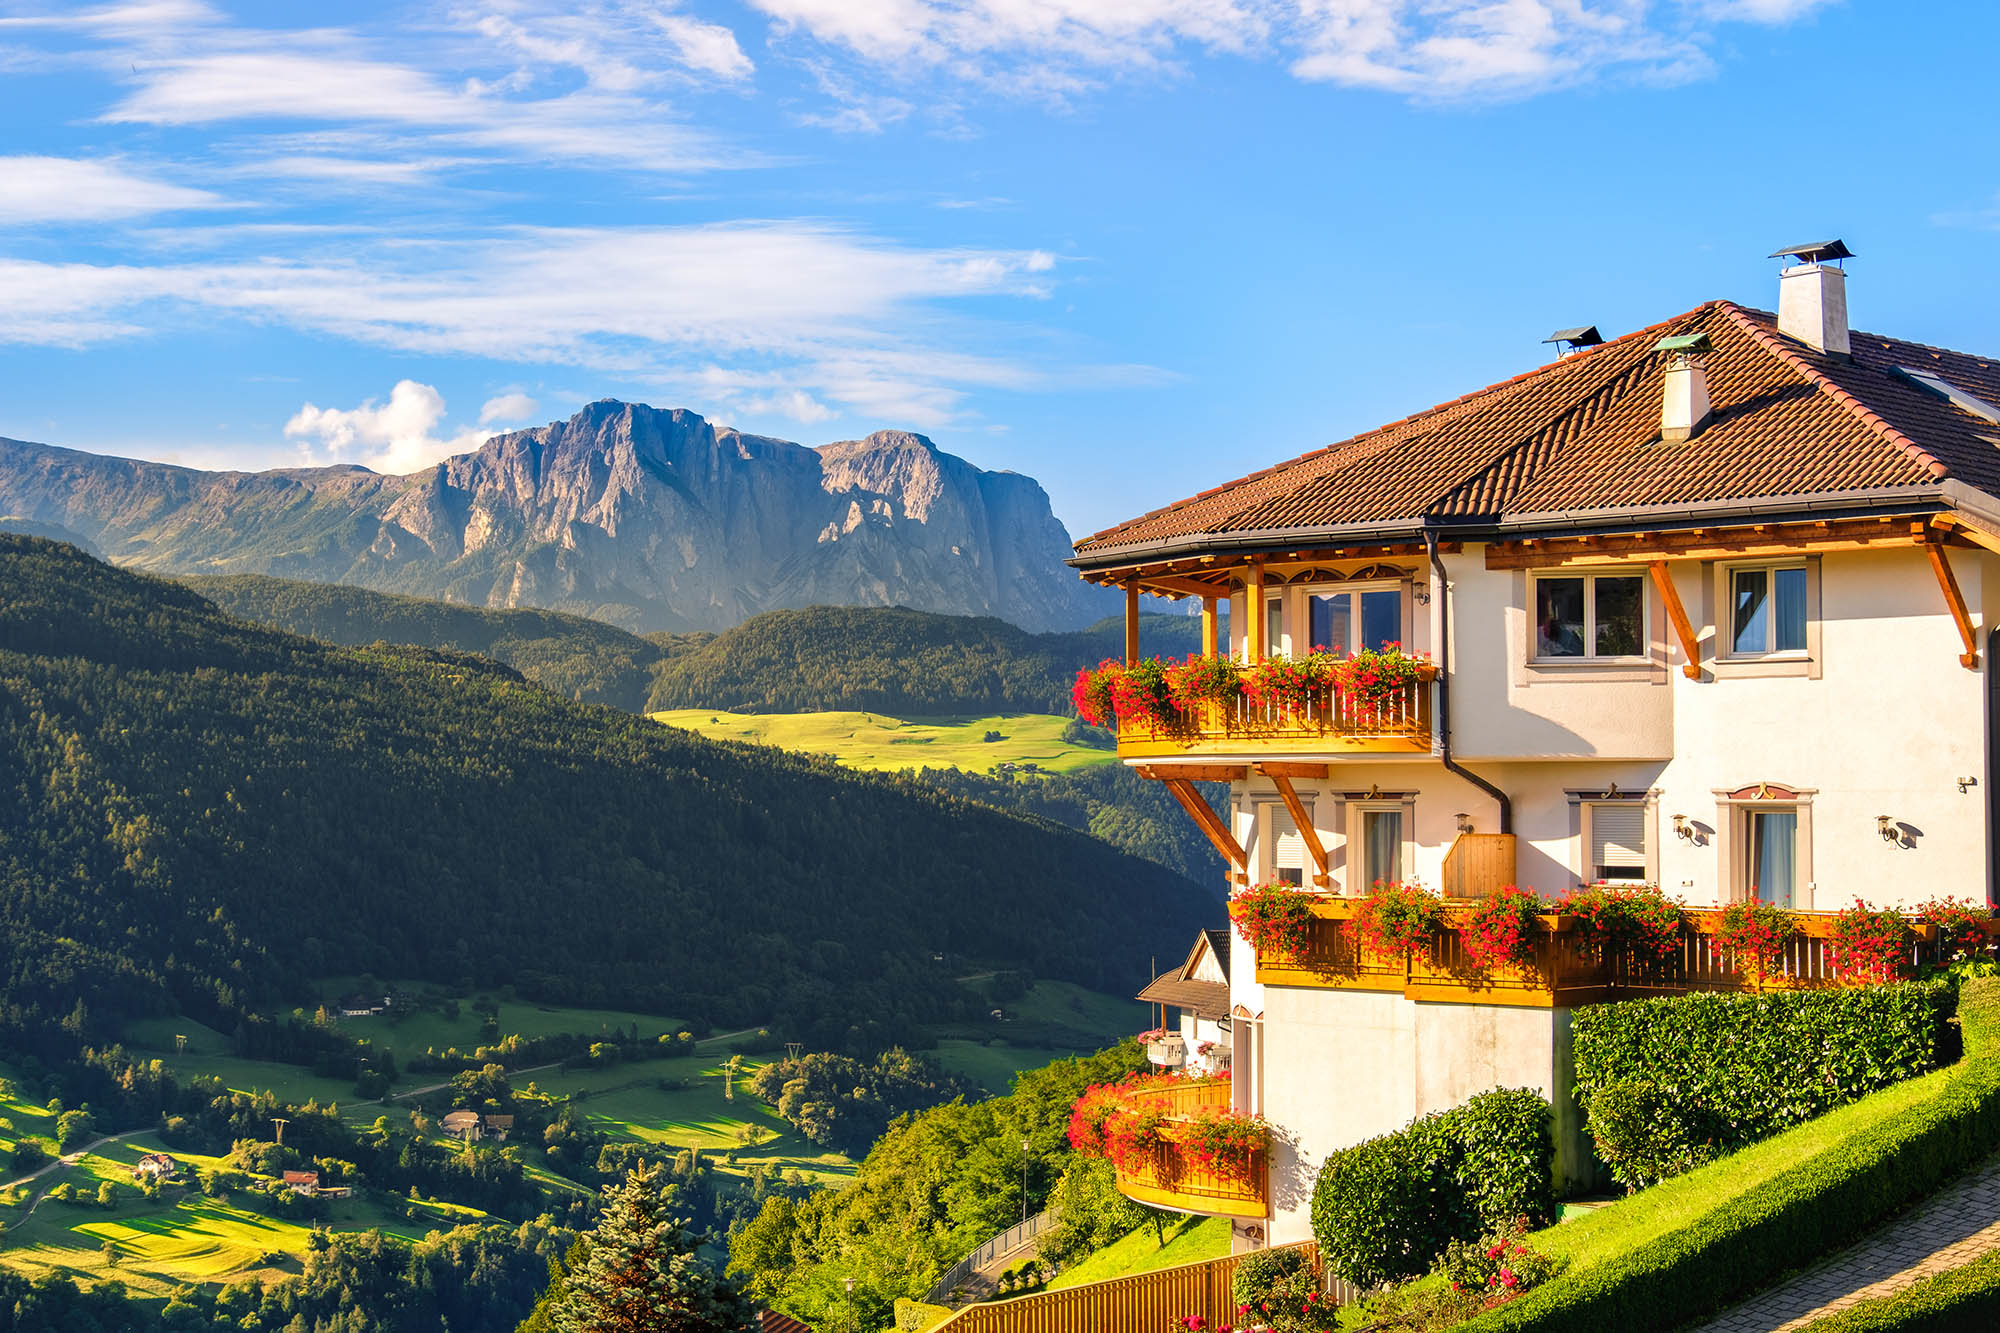 Multistory building with balcony overlooks a sunny Italian Dolomites, with lush green surroundings.